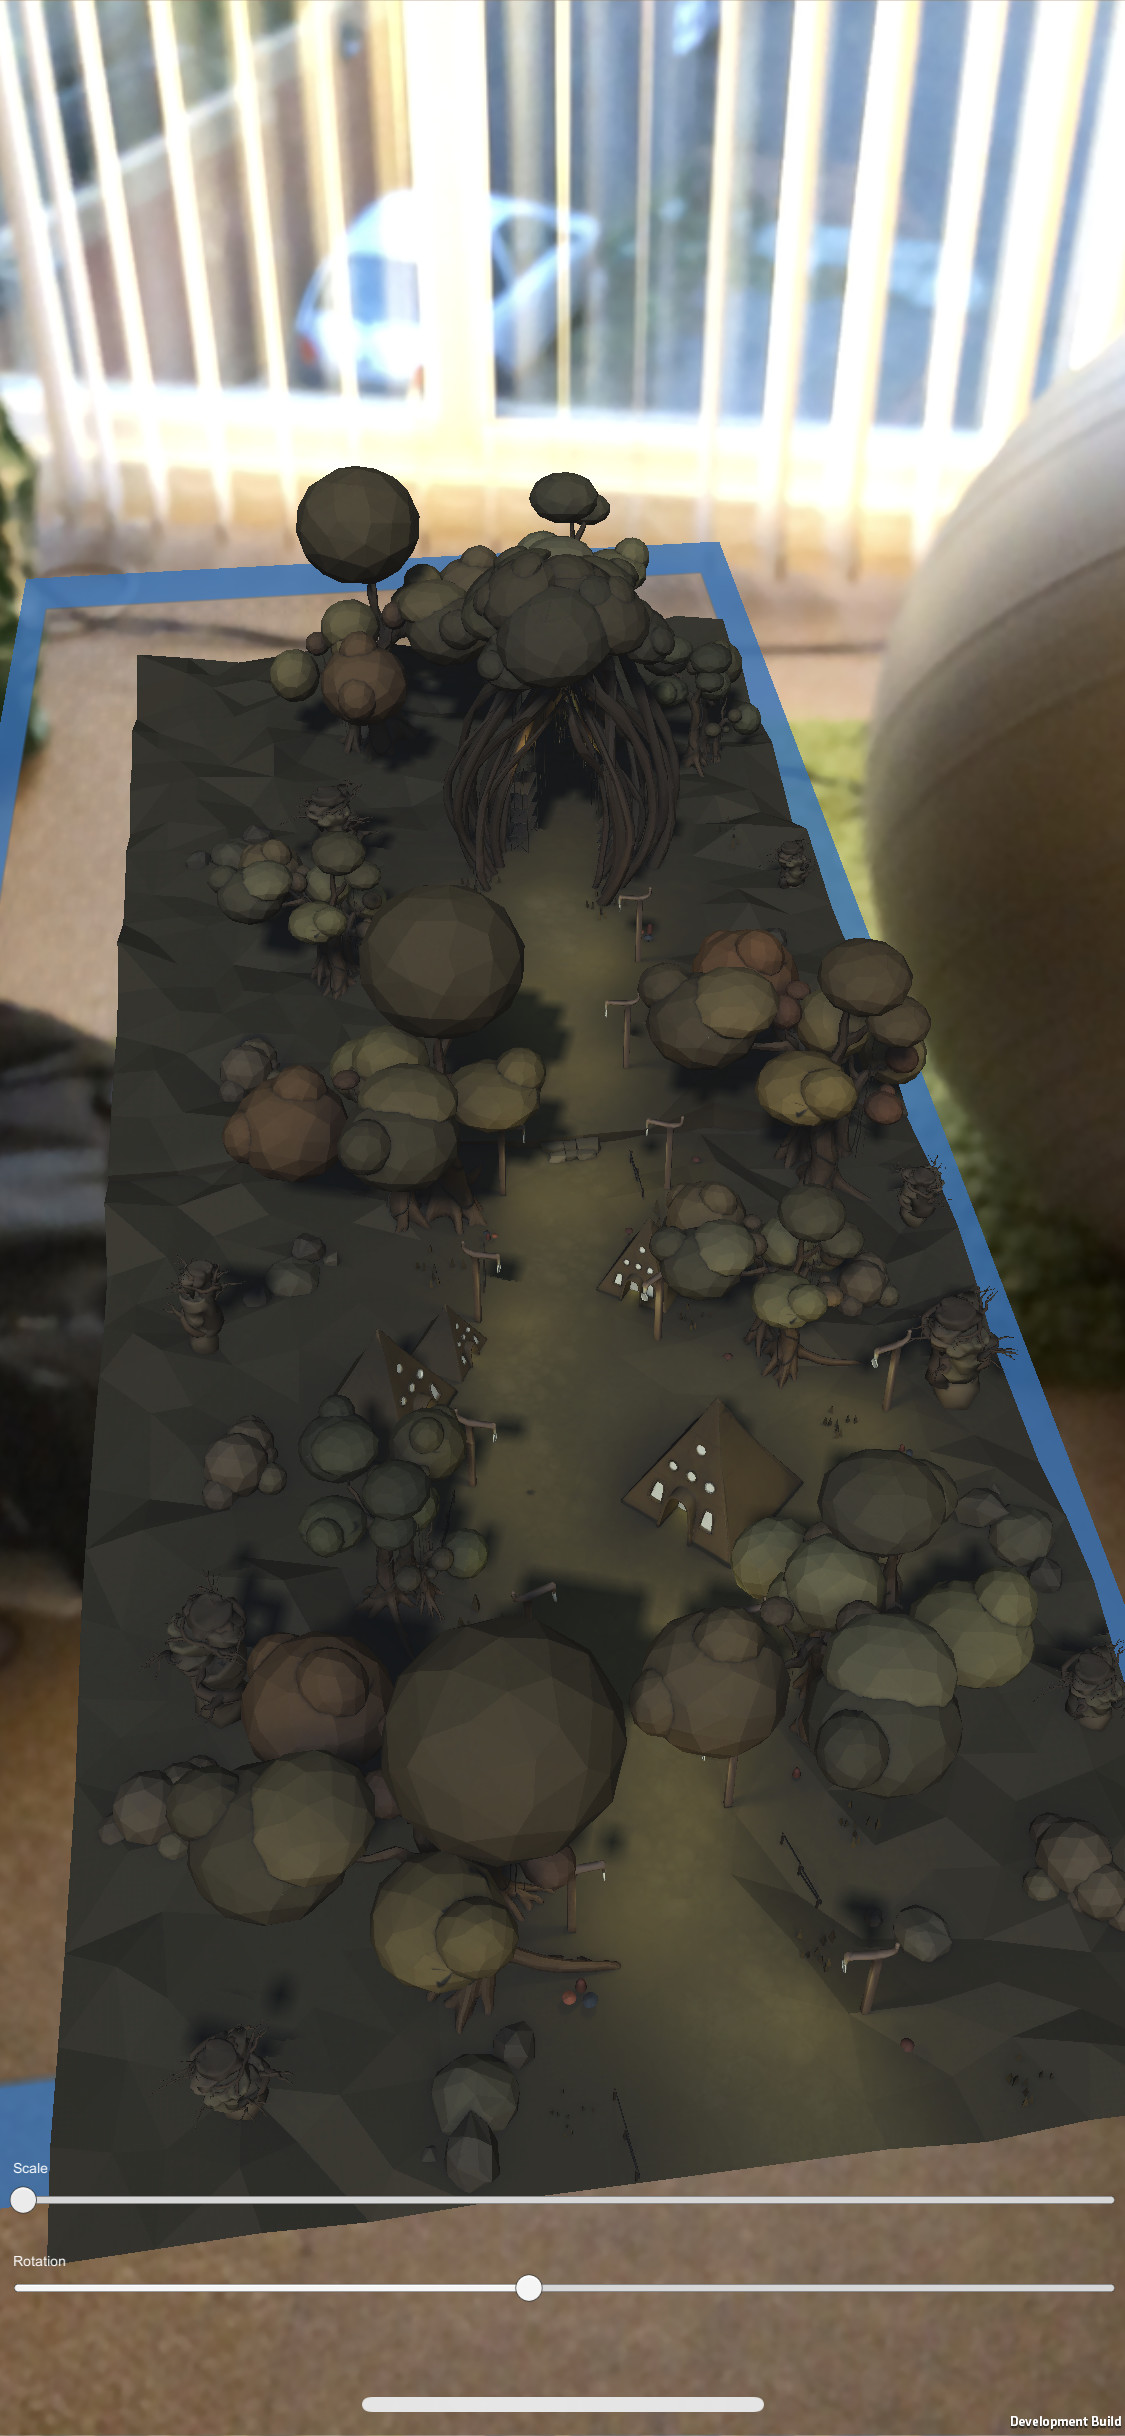 Placing it again, but with controls for rotation and scale. The blue
        outline represents where ARKit has detected a surface (on a messy floor in this case).